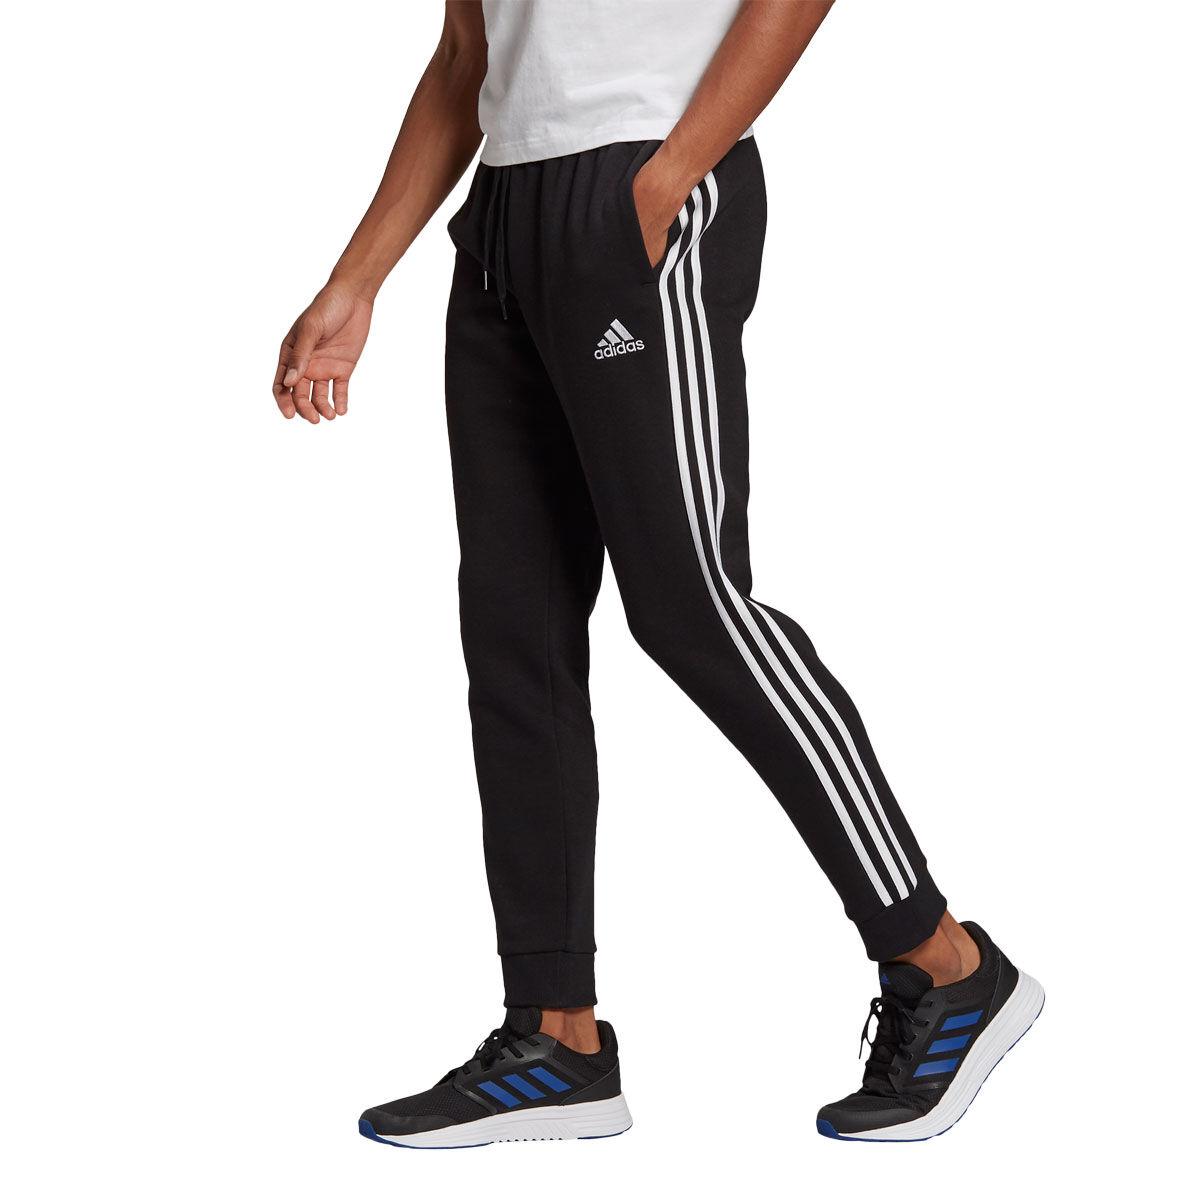 adidas Trousers & Lowers for Men sale - discounted price | FASHIOLA INDIA